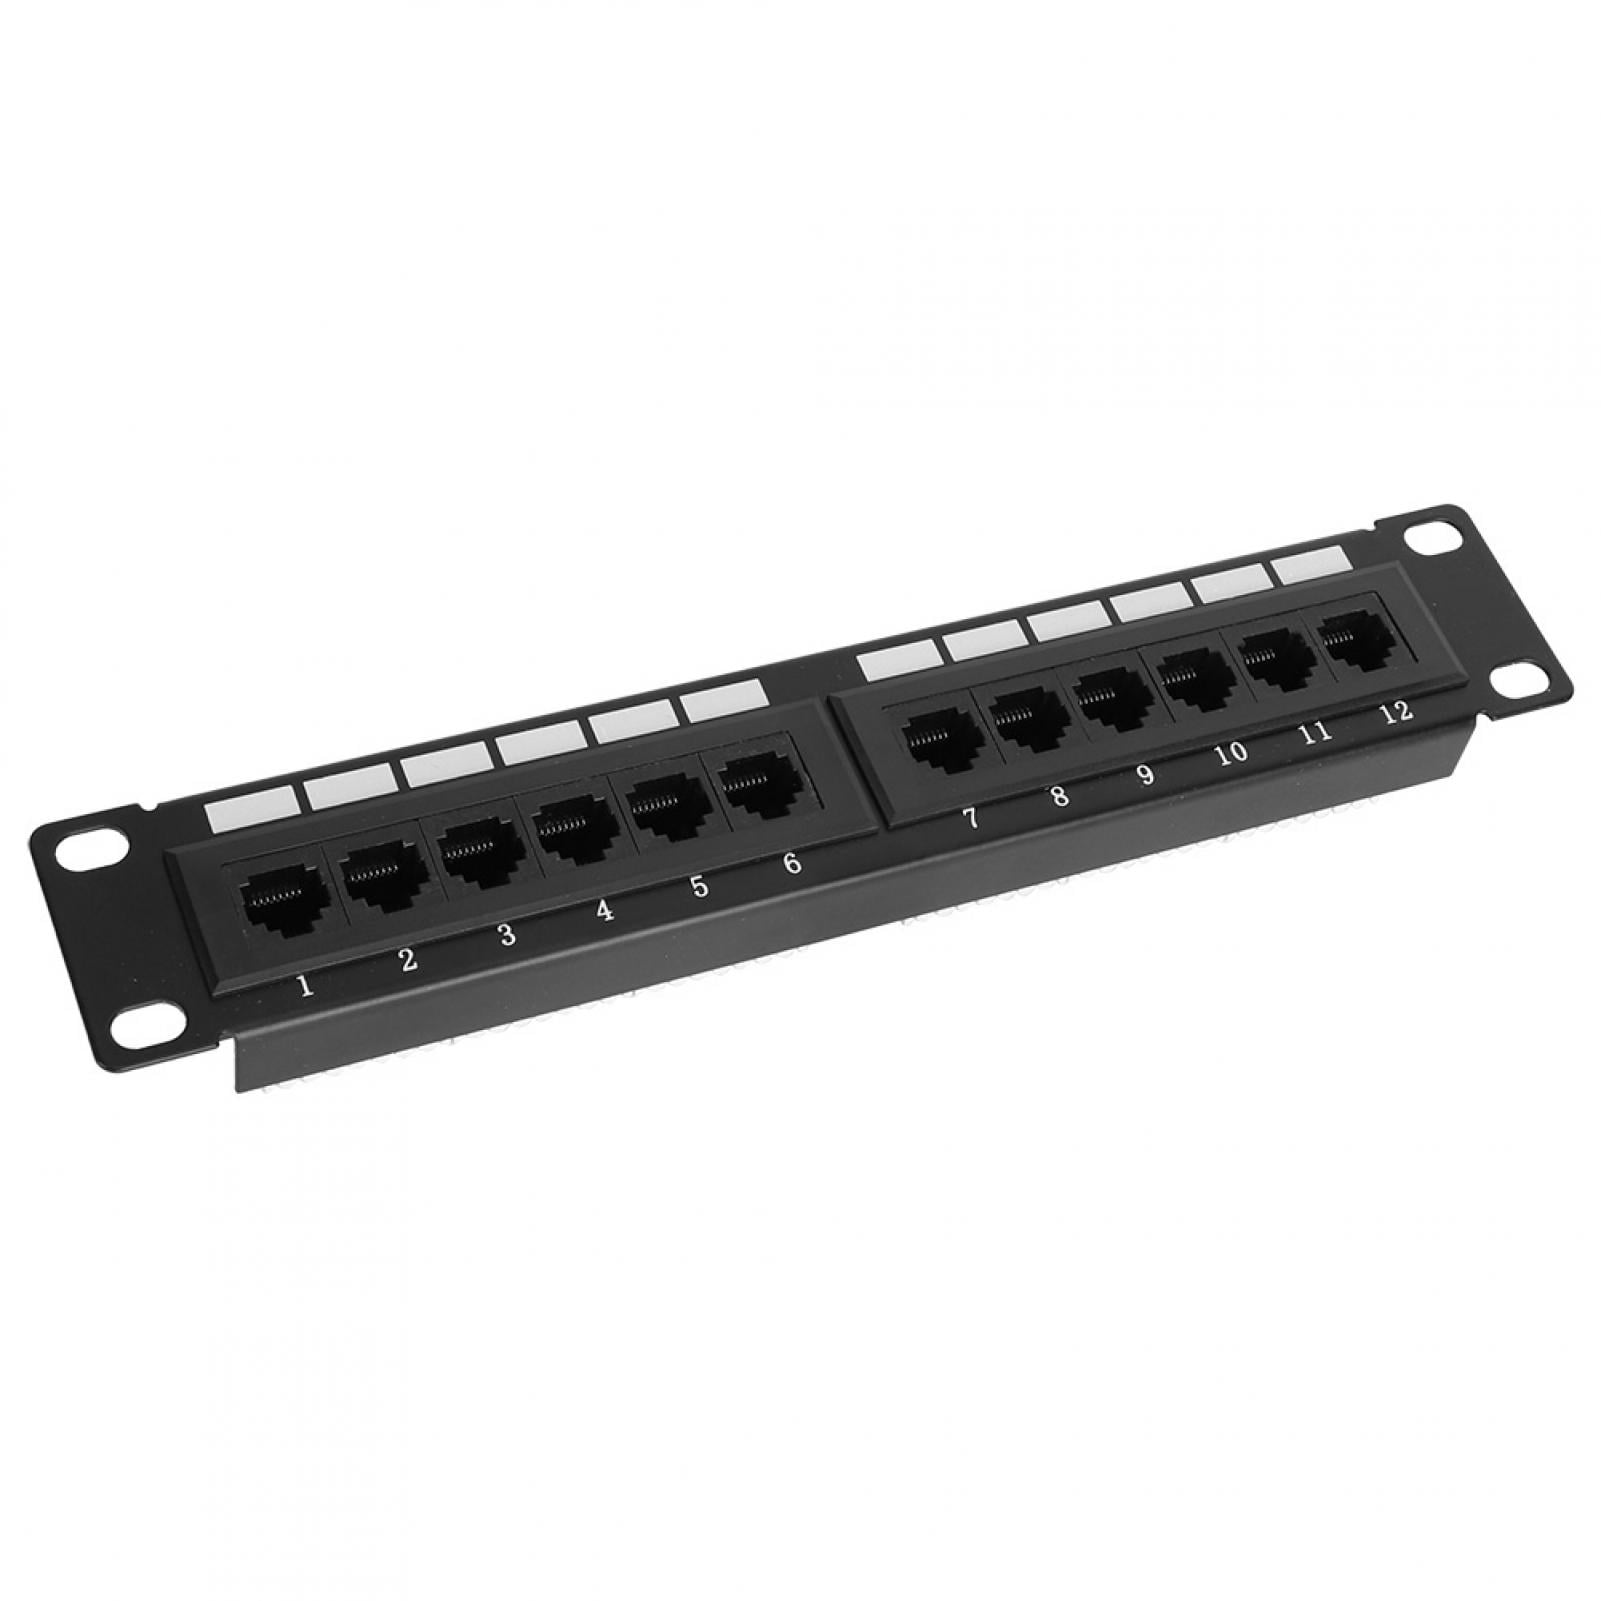 Screw 5/ Category 6 Data Patch Panel Network Cable Rack PPO+PC Home for Ethernet Connections Office Industry 